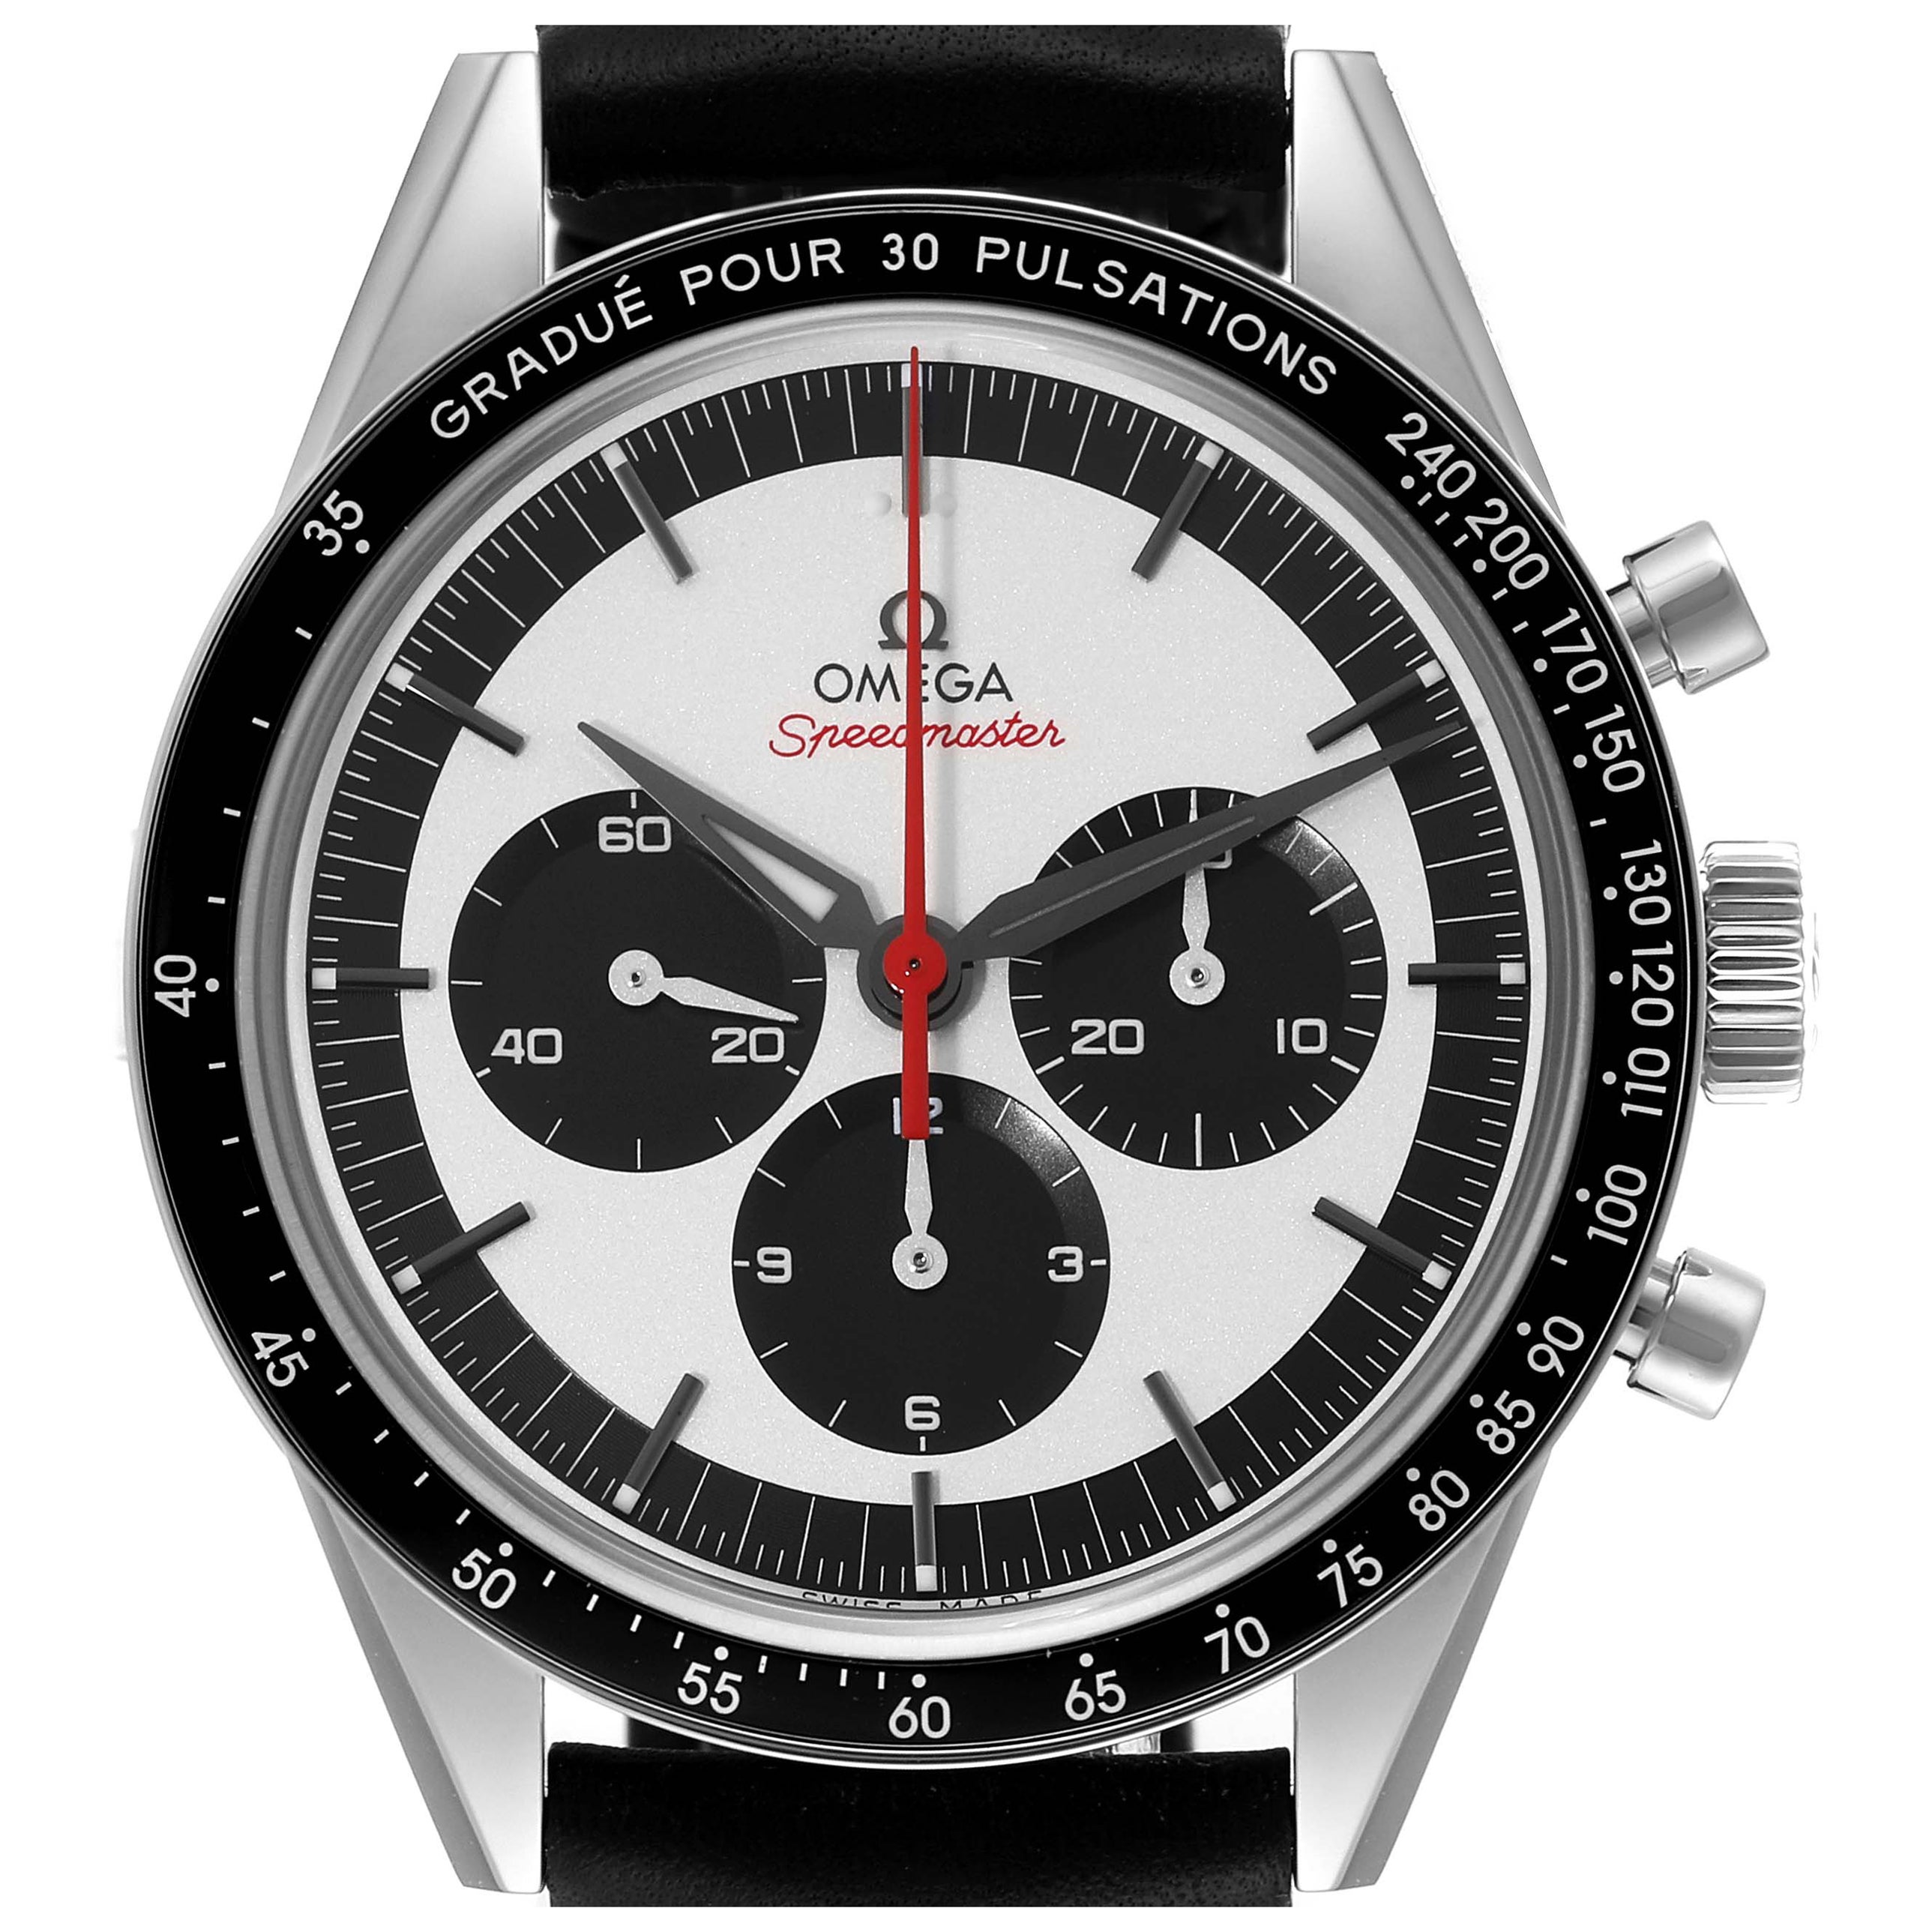 Omega Speedmaster Limited Edition Steel Mens Watch 311.32.40.30.02.001 Card For Sale